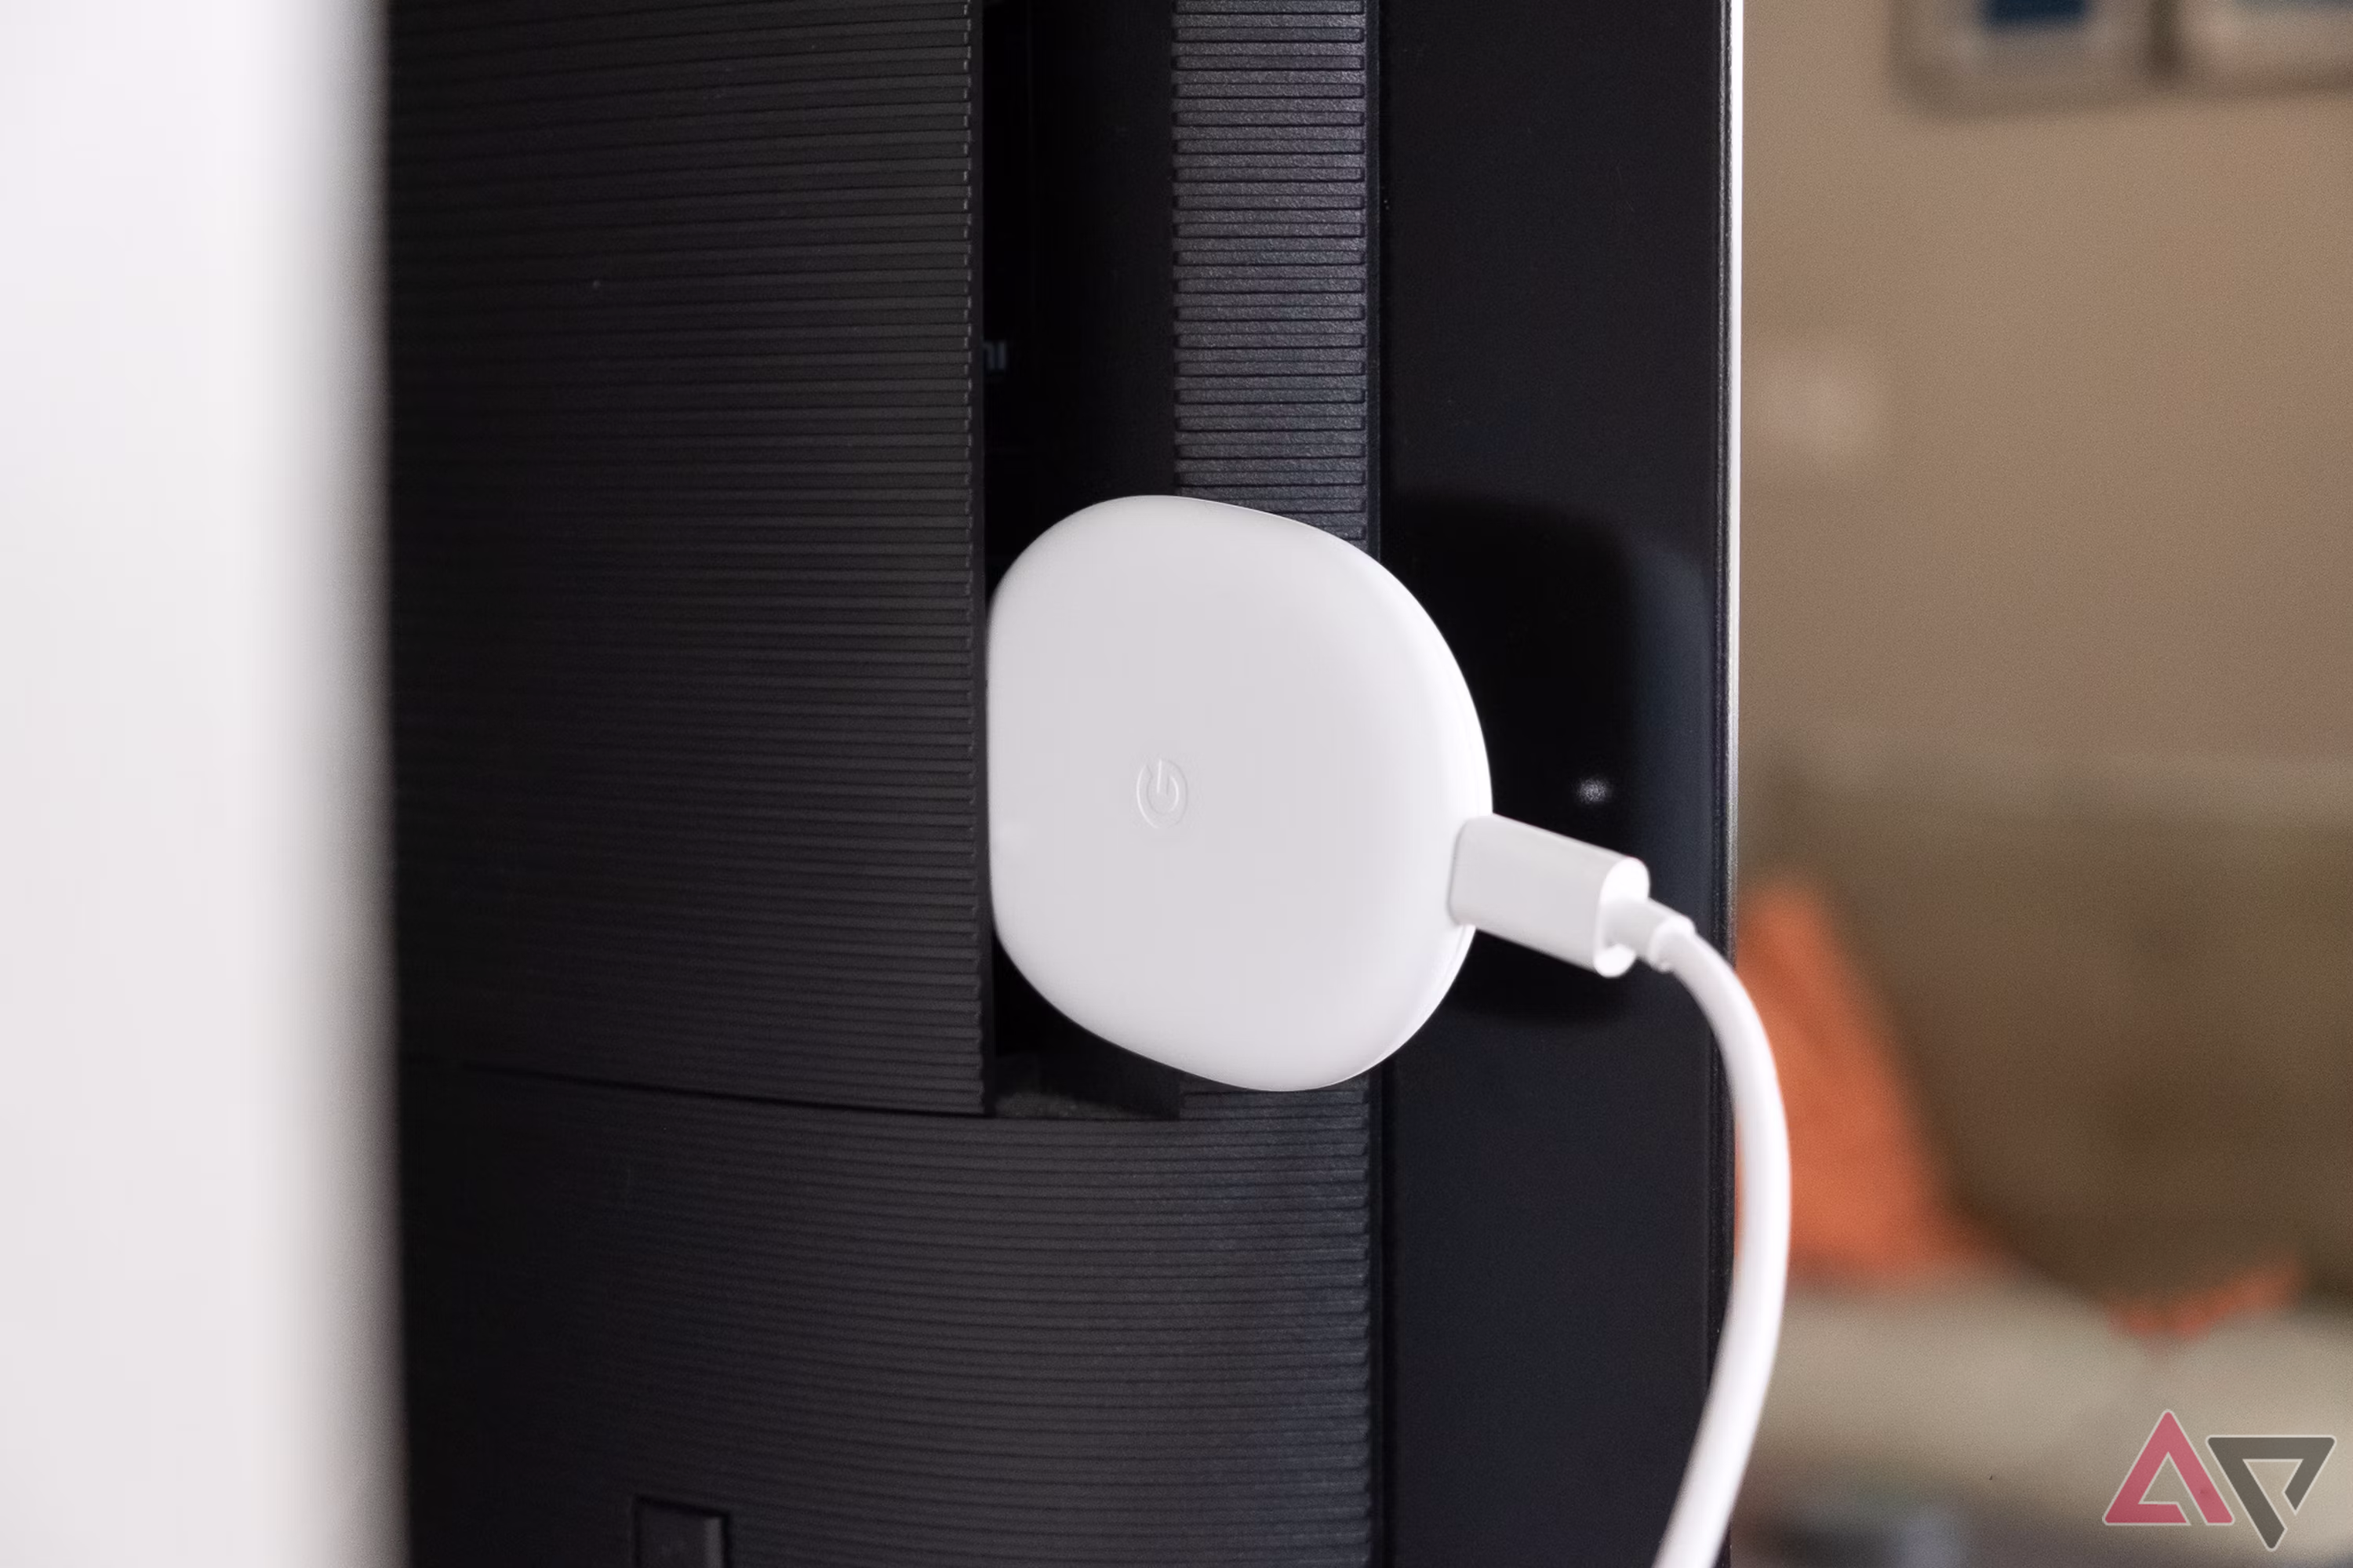 Google TV Streamer is likely the next-gen Chromecast we’ve all been waiting for